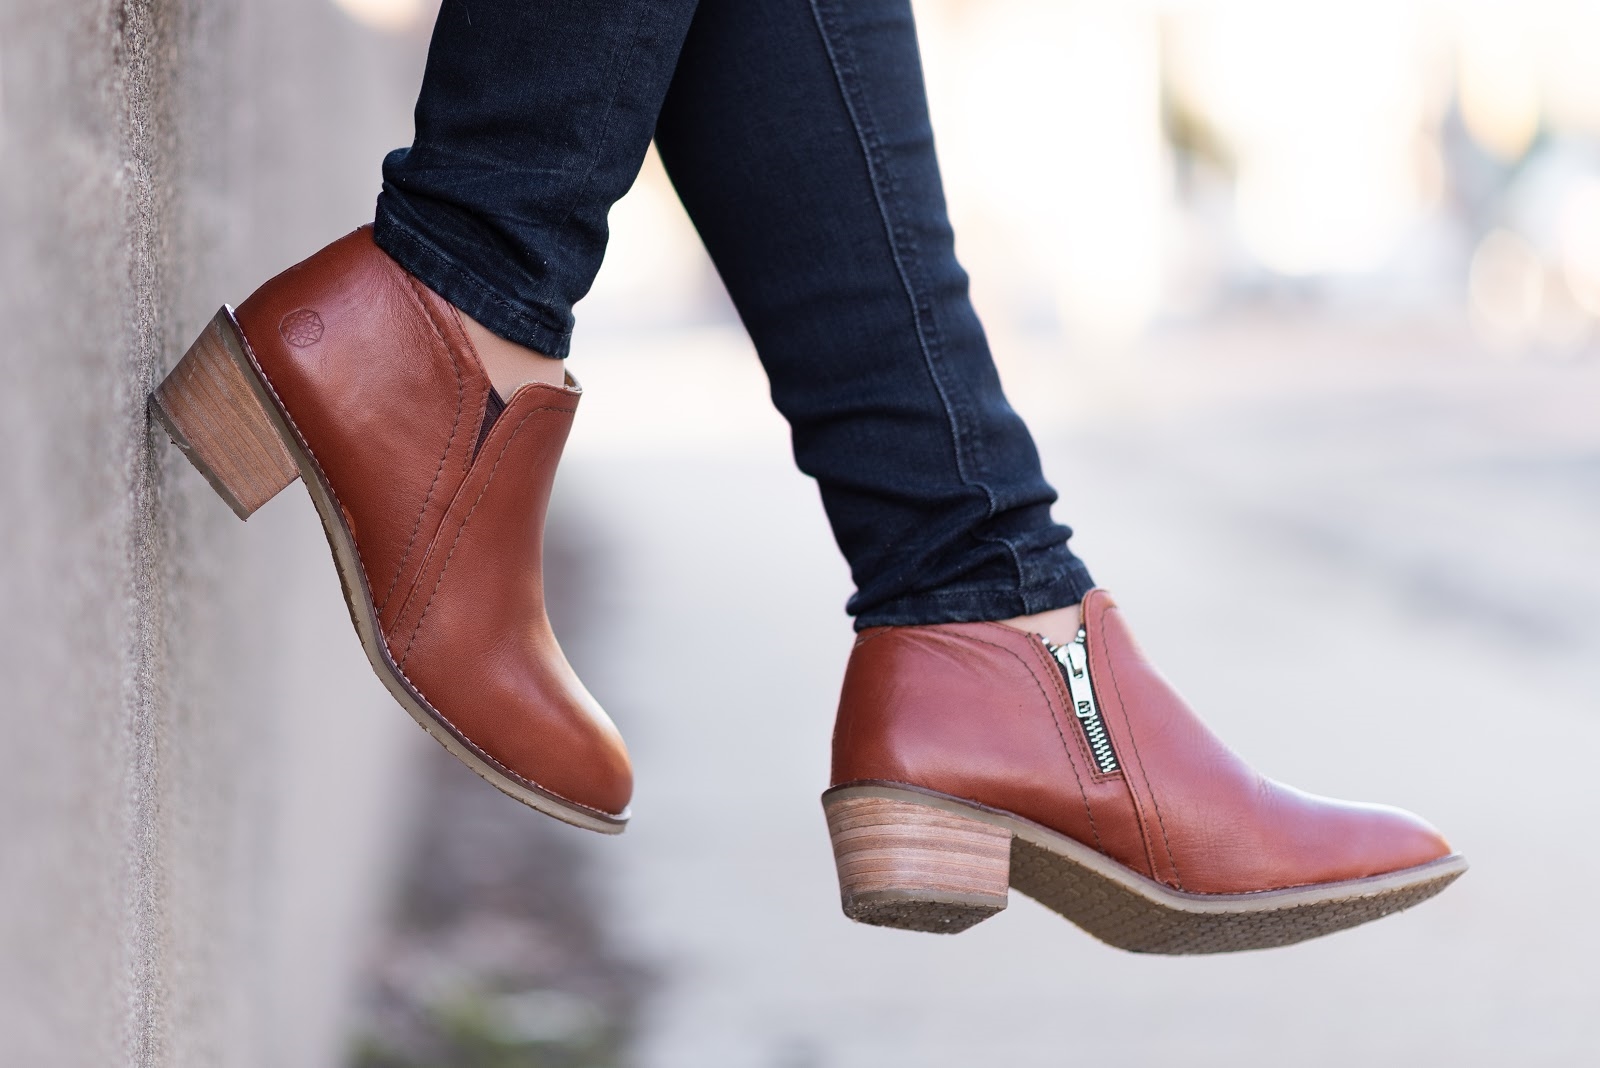 Stylish Women's Work Boots, Safety Shoes, and Apparel